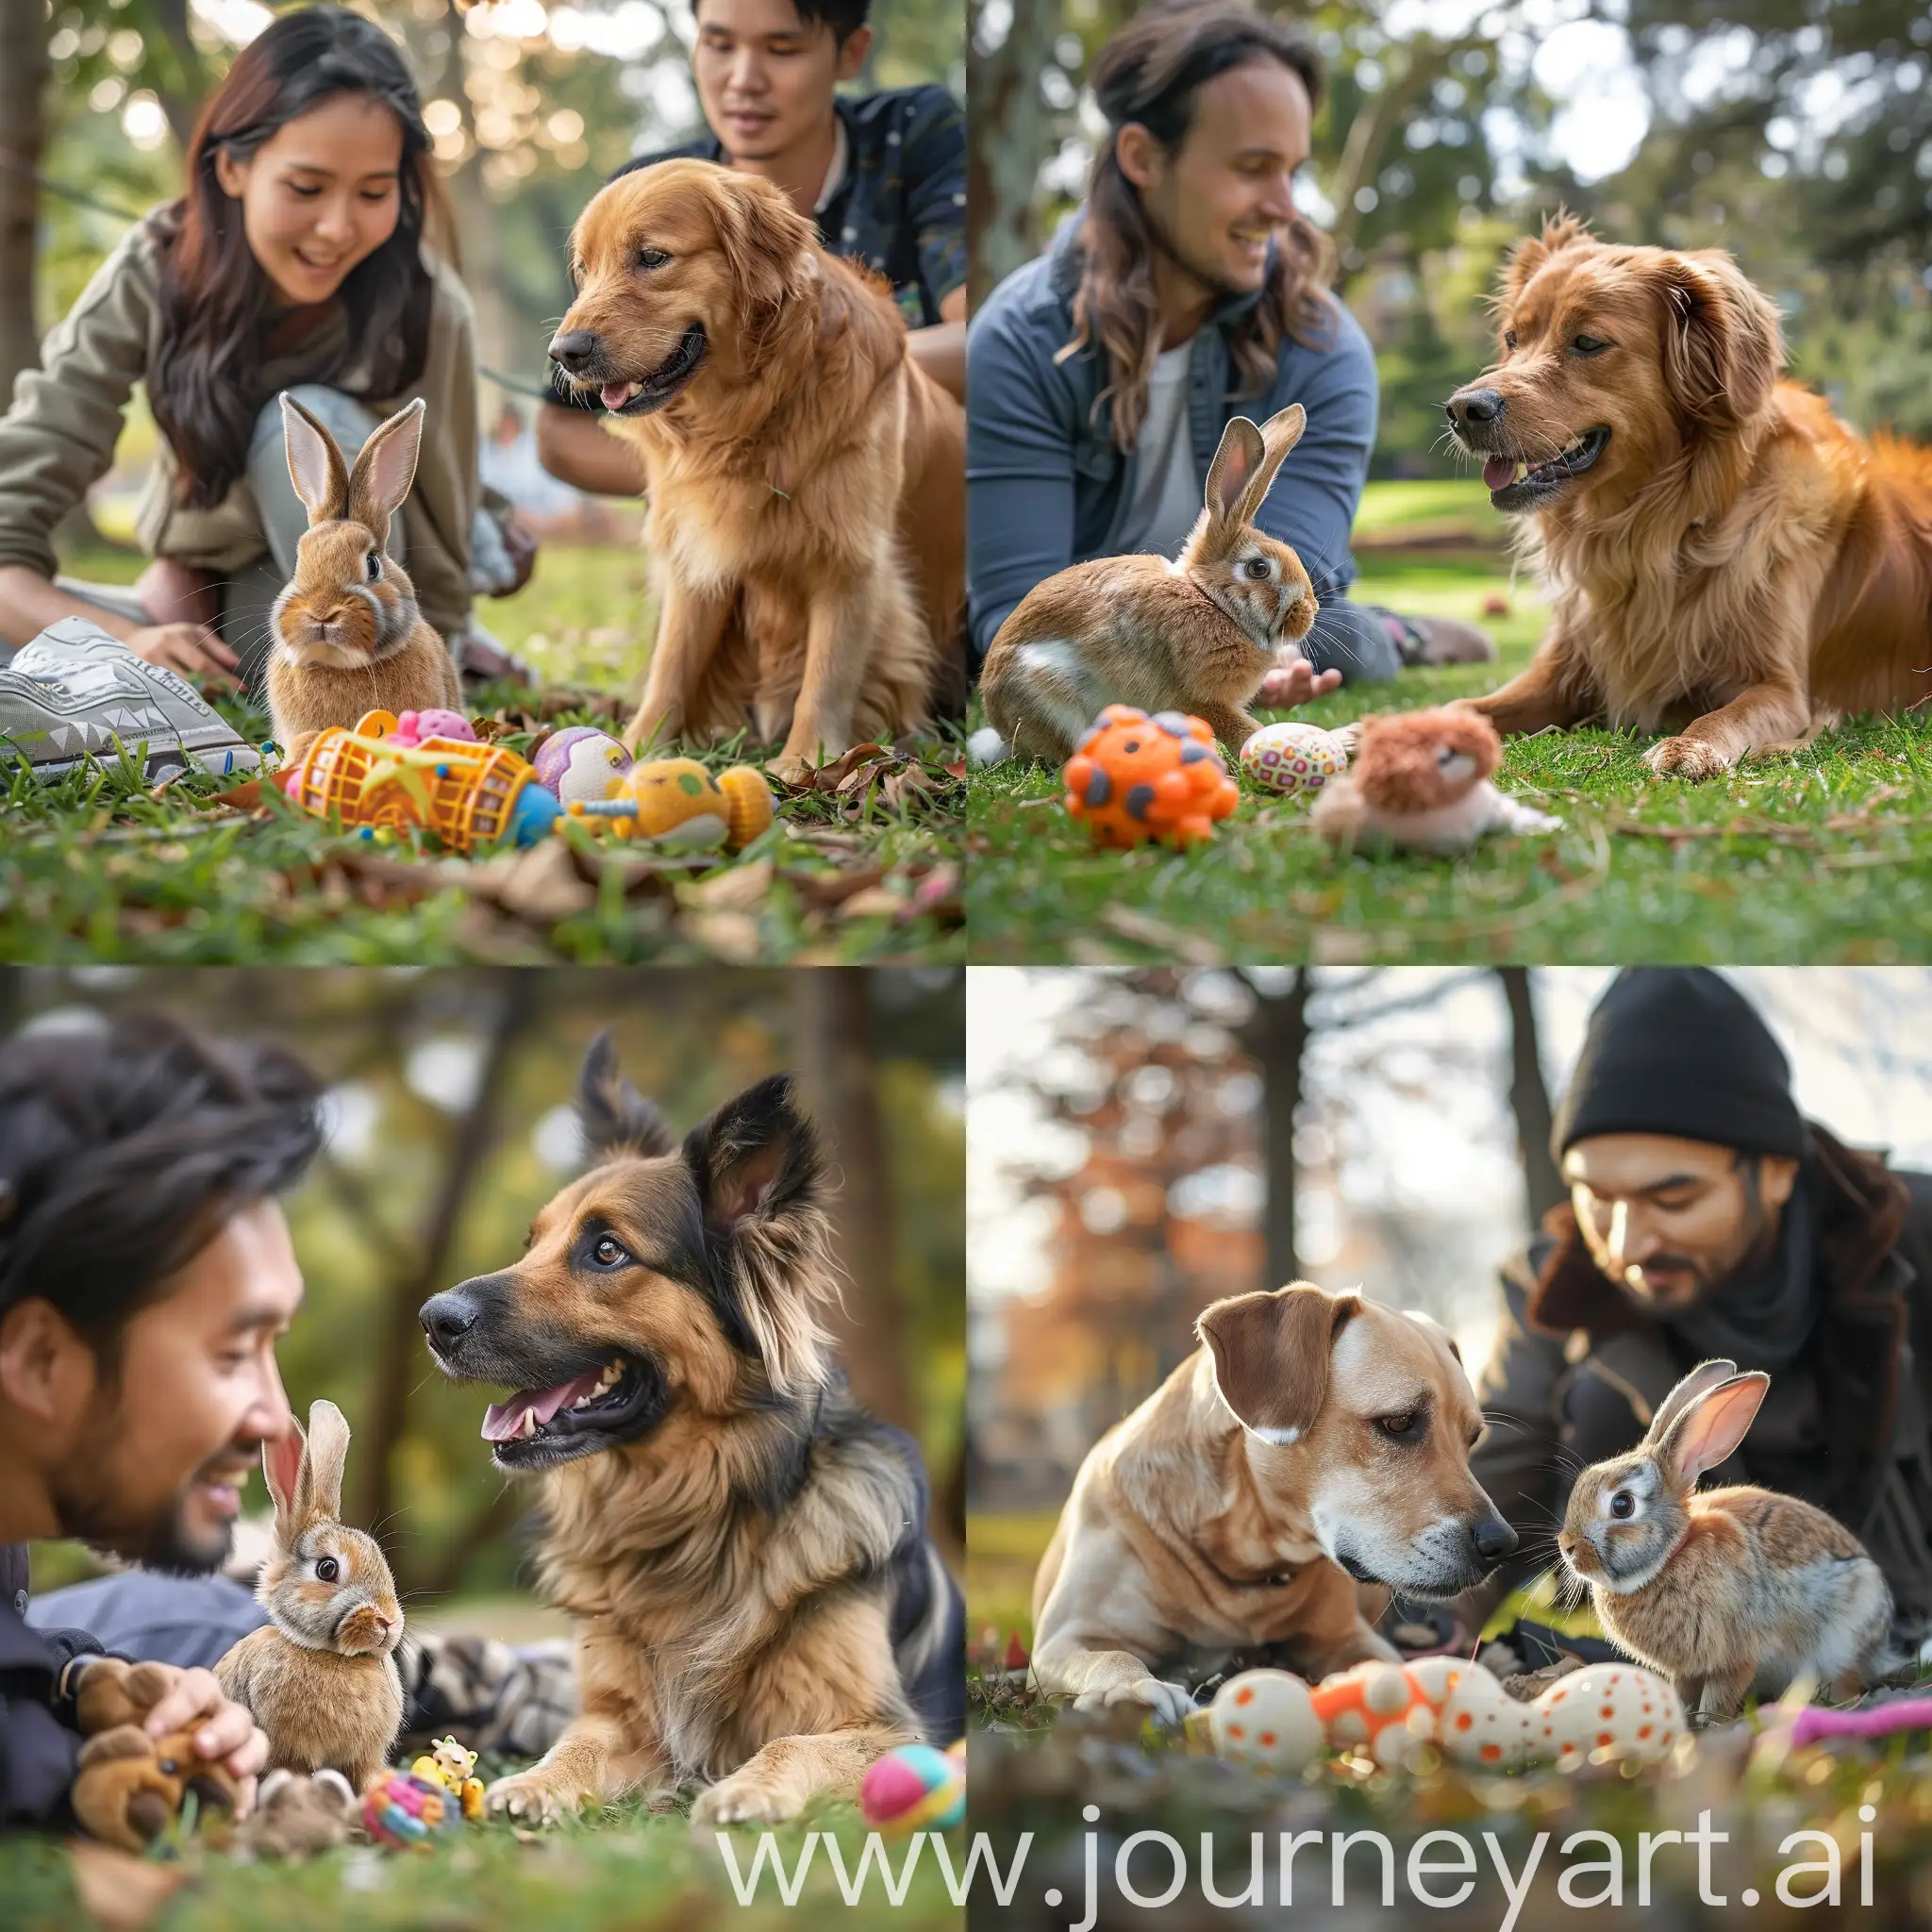 an adorable dog playing with a cute rabbit in the park that is completely with toys and with the owner who looks at them with love and delight